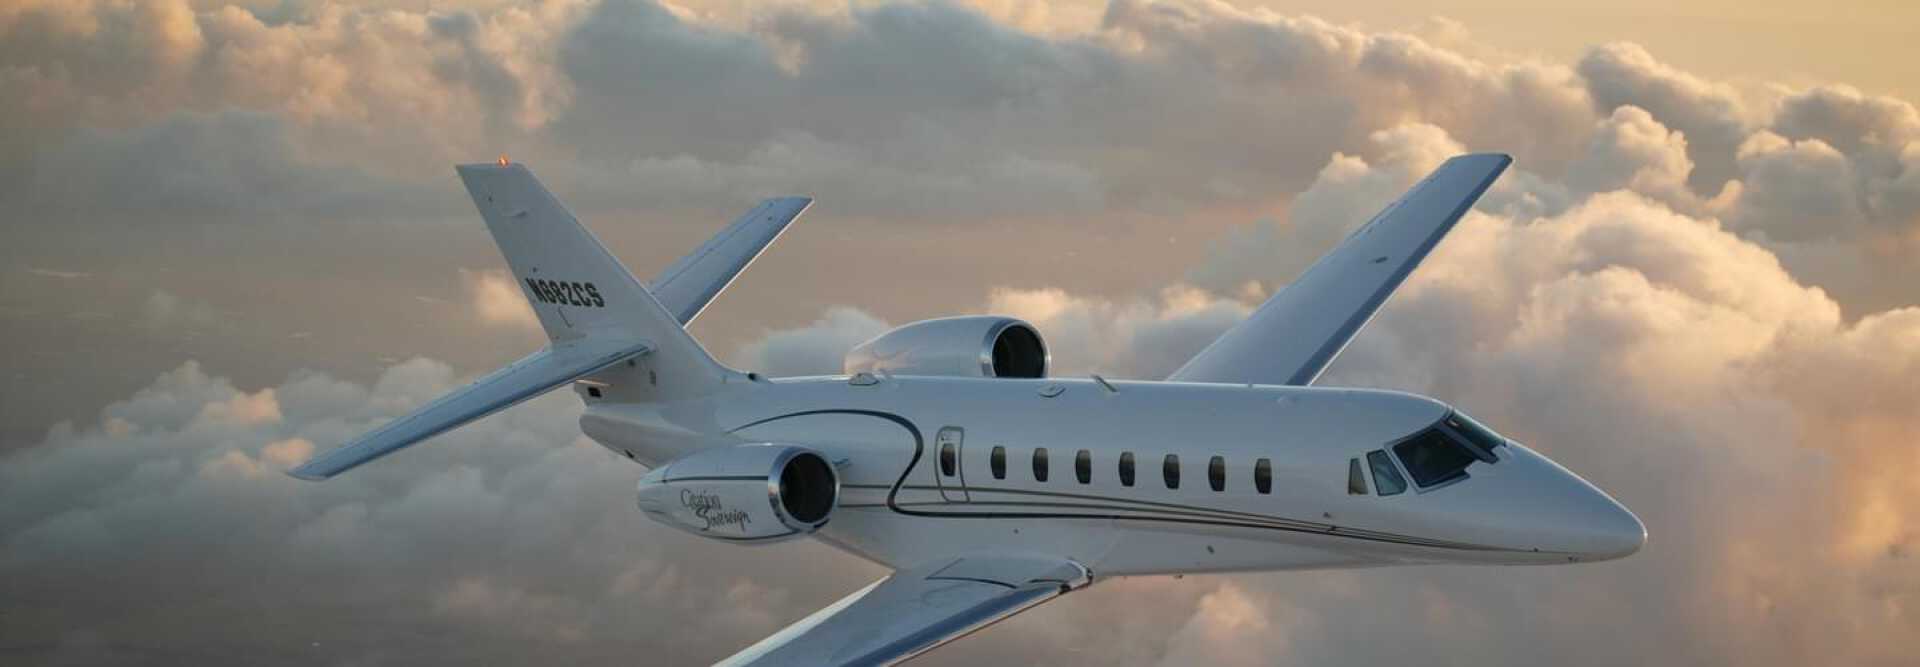 Light Jet Cessna Citation Sovereign to charter for private aviation flights with LunaJets,high performance aircraft offering excellent service